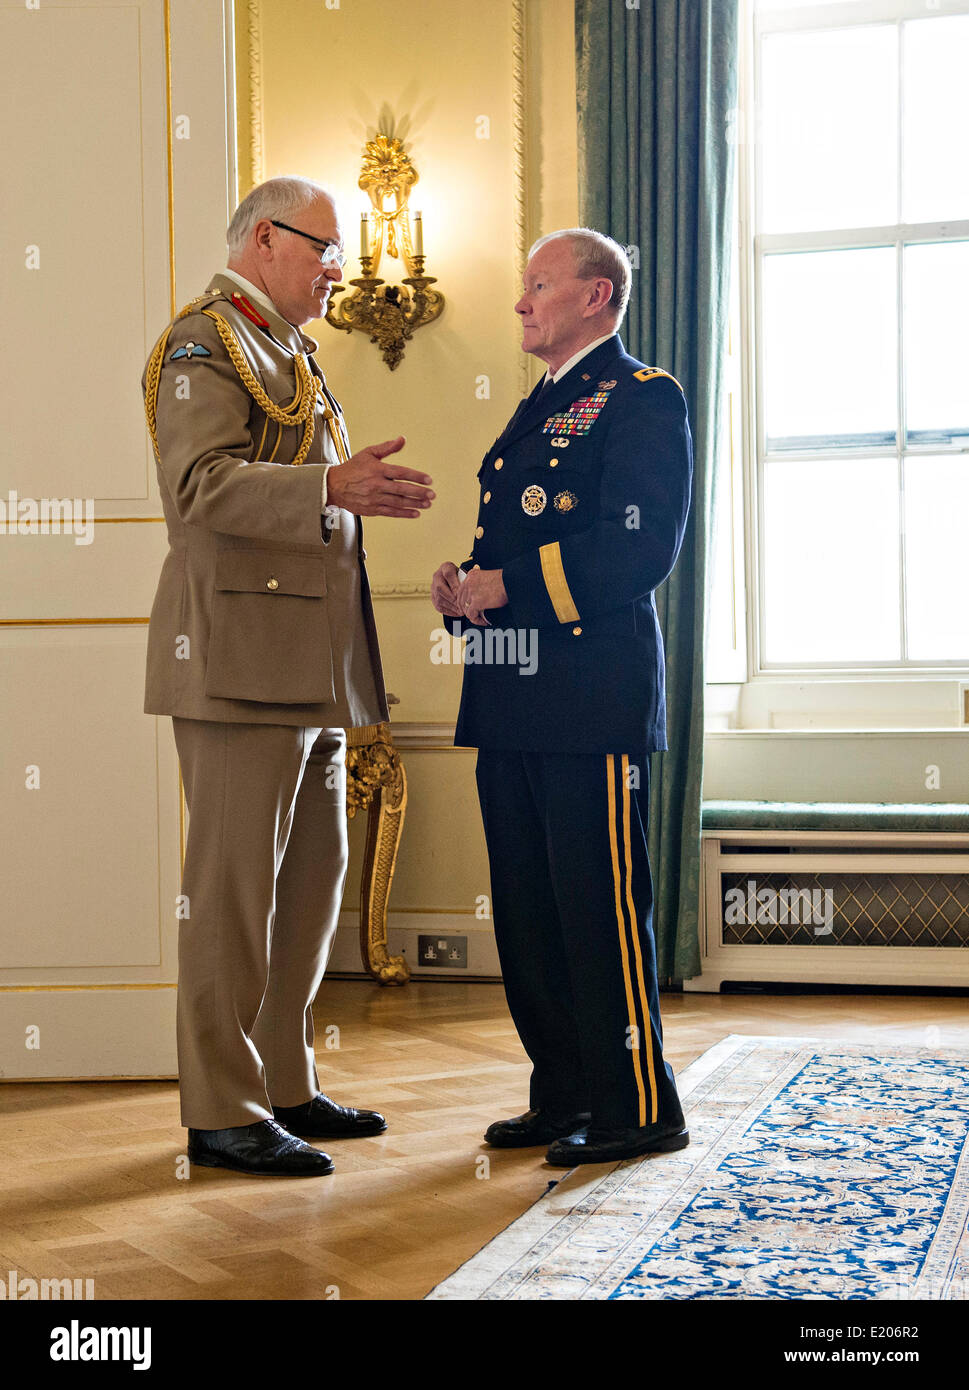 US Chairman of the Joint Chiefs Gen. Martin Dempsey, talks with U.K. Chief of General Staff Gen. Sir Peter Wall before a meeting with U.K. Prime Minister David Cameron as a part of a Defense Chiefs Strategic Dialog Group with US and UK defense chiefs June 10, 2014 in London, UK. Stock Photo